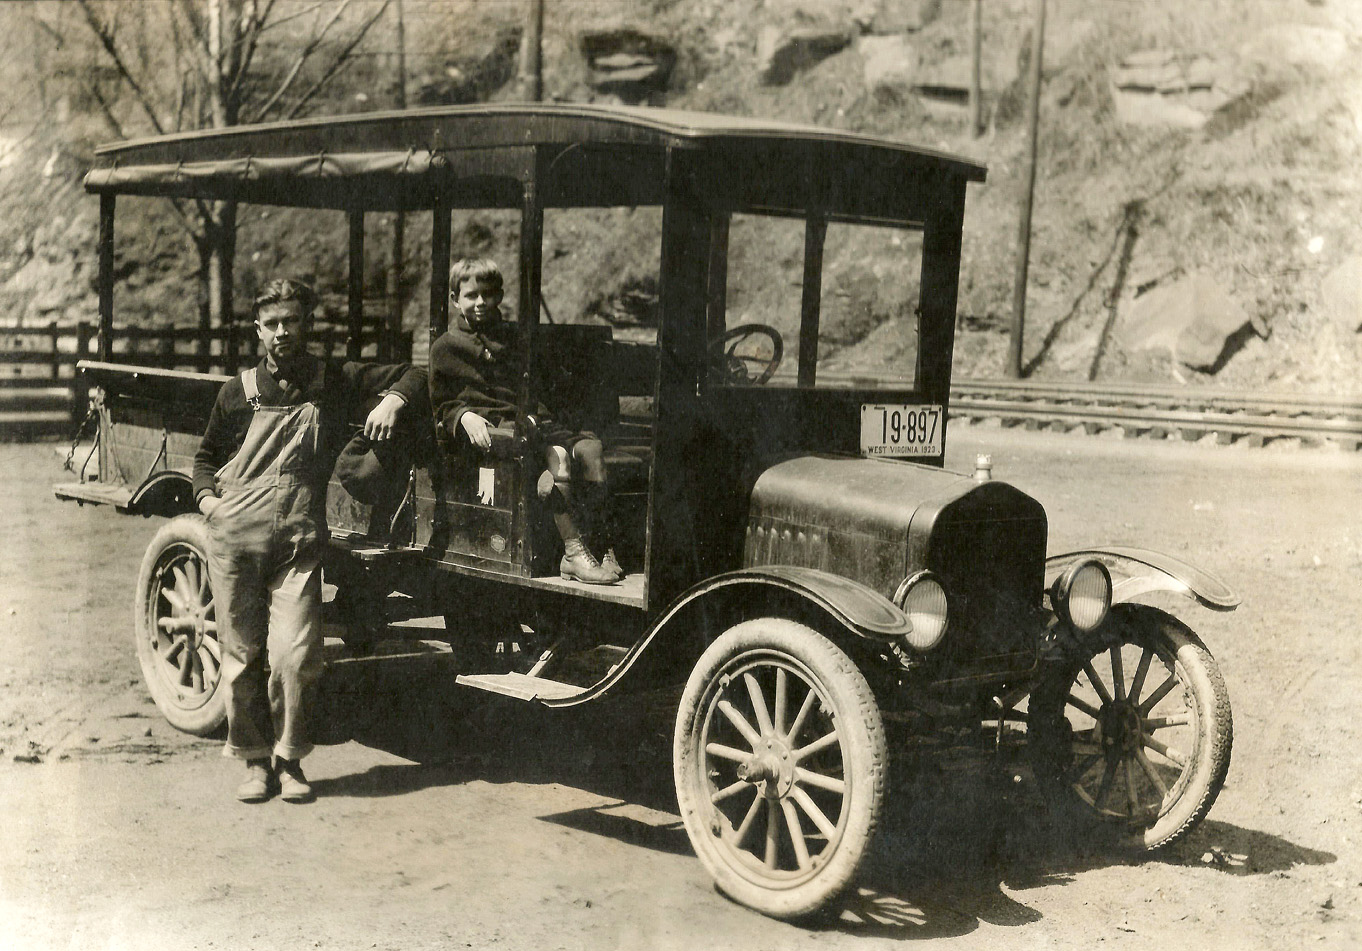 My wife's grandfather, John William Hicks Mitchell, a delivery man for Austin's Grocery in Northfork, McDowell County, West Virginia, in 1923. He moved to Northfork from Elk Creek, Virginia in hopes of finding work. Prior to the store owner's purchase of this truck, Bill delivered groceries by horse and wagon. "Bill" Mitchell was 20 years old in this picture; the young boy shown with him is unknown to our family. I was fortunate to have known Bill well for many years, after marrying his granddaughter in 1985. Bill passed away just shy of his 90th birthday in 1993. View full size.